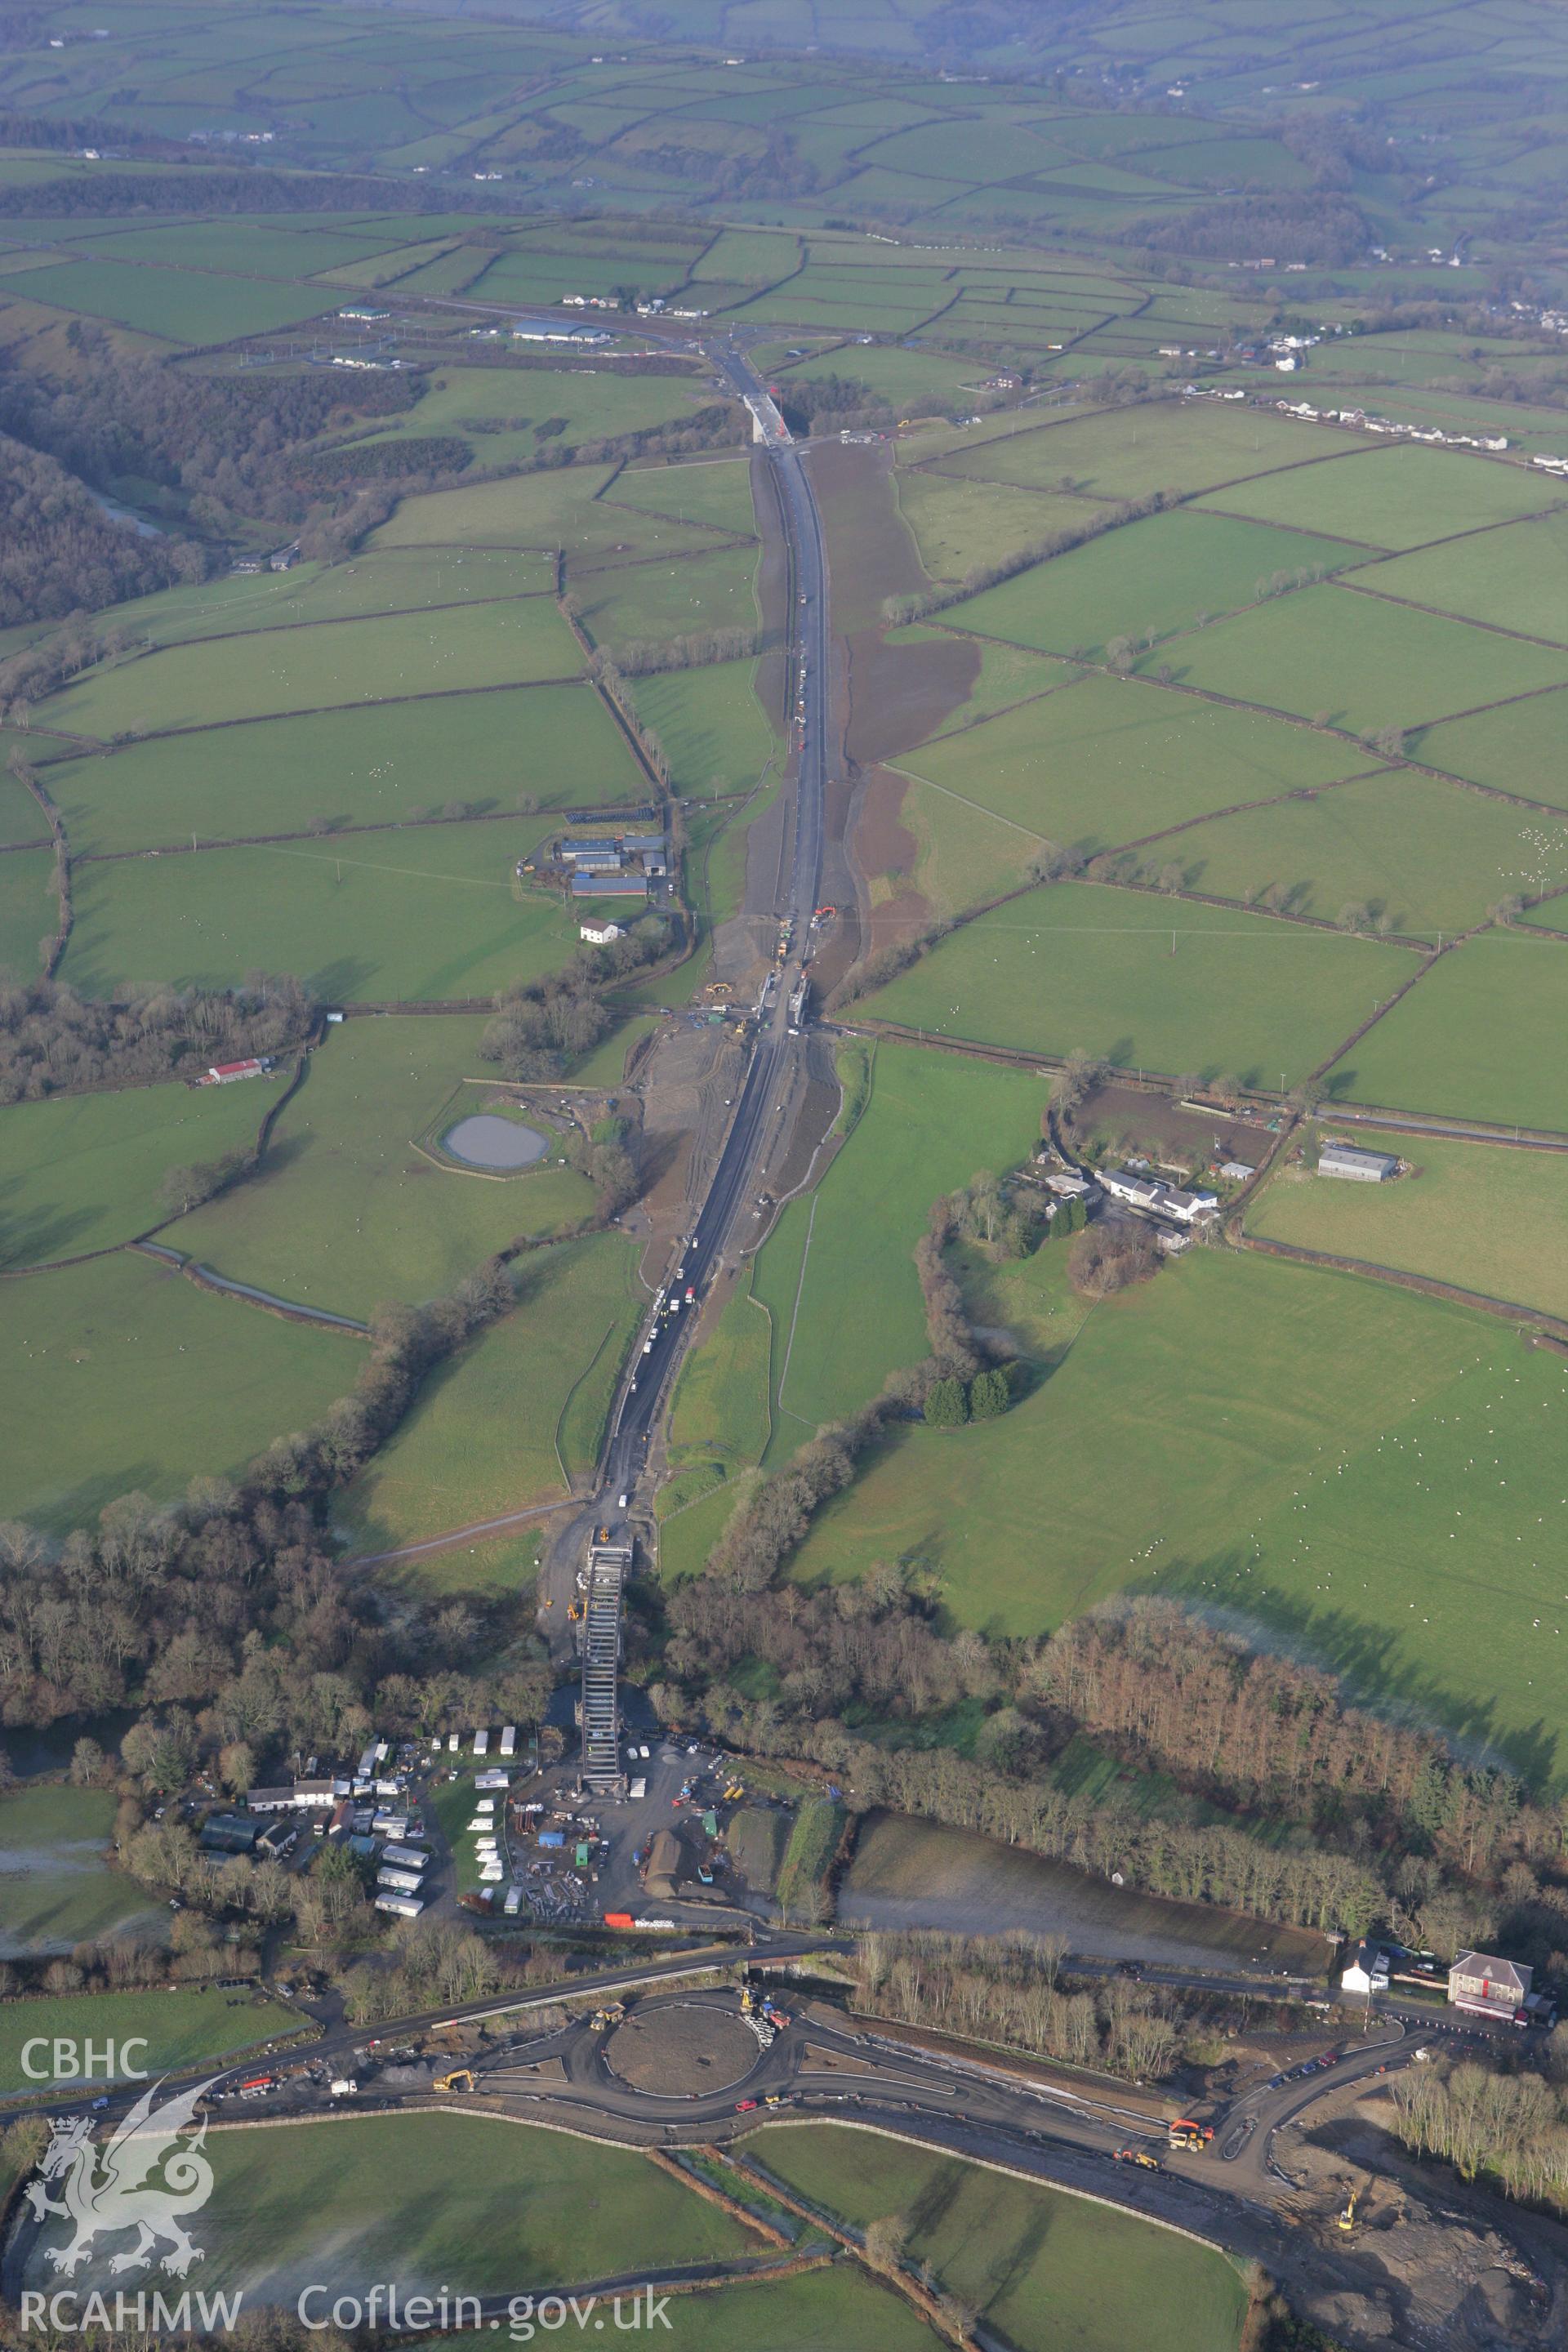 RCAHMW colour oblique photograph of Llandysul Bypass - A486, under construction. Taken by Toby Driver on 15/12/2008.